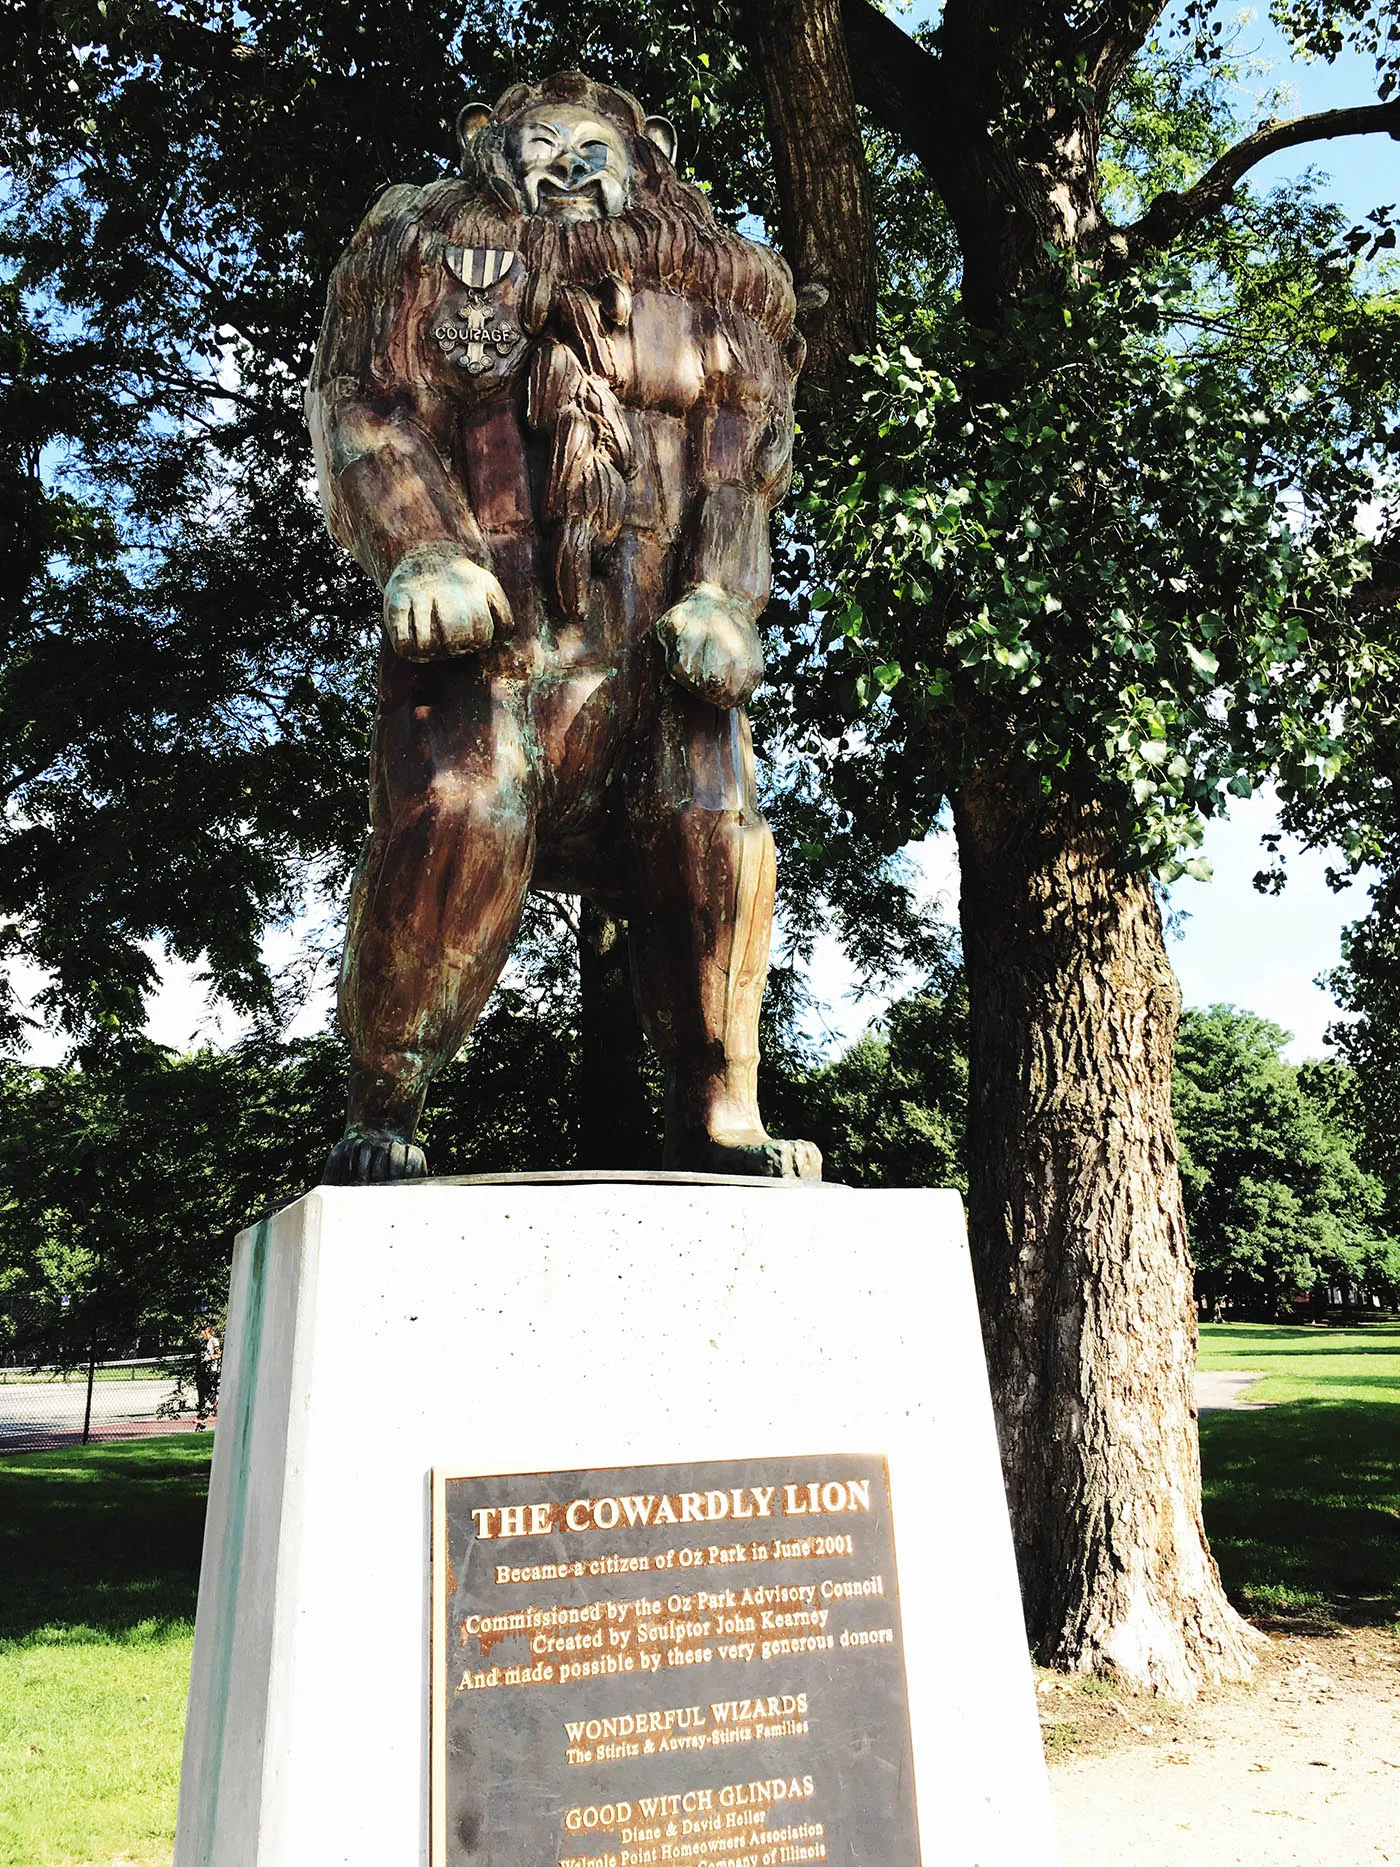 The Cowardly Lion  statue at Oz Park in Chicago, Illinois - a Wizard of Oz themed Park.